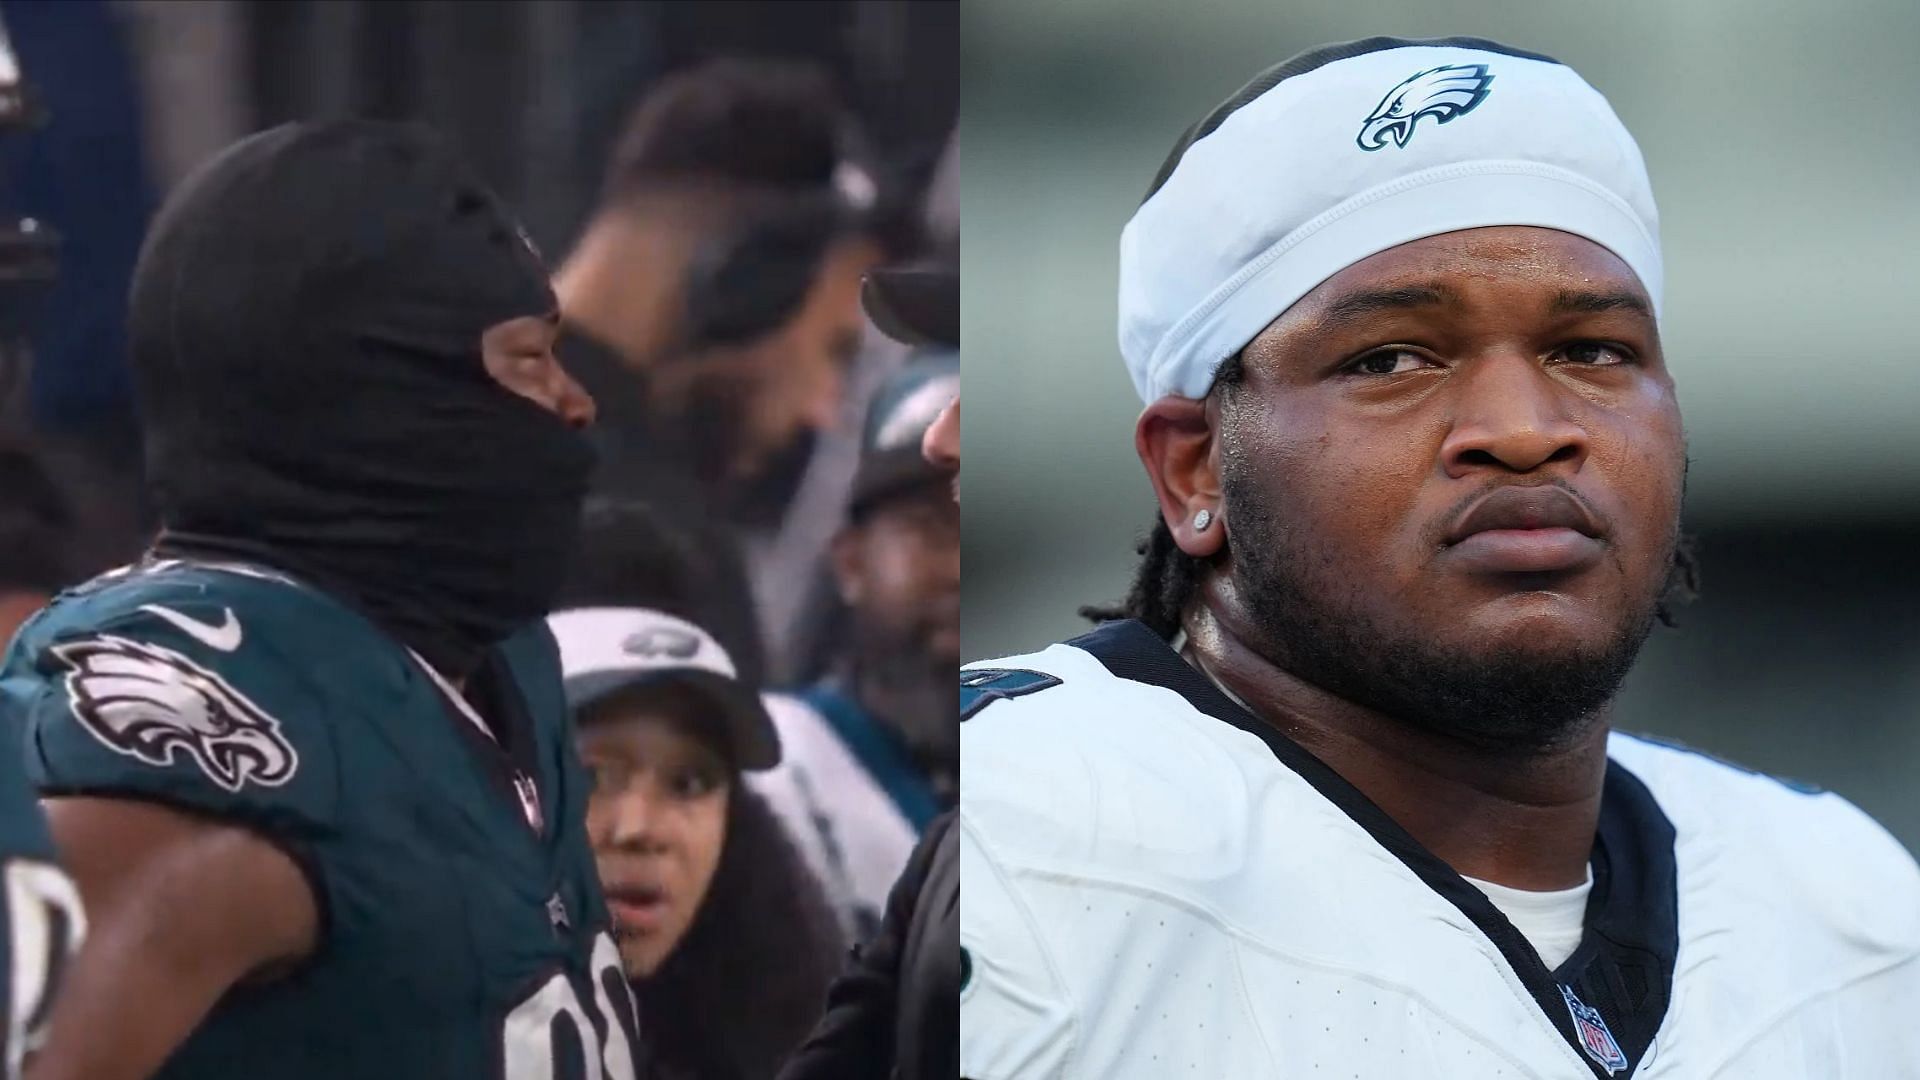 Jalen Carter was purportedly crying during Eagles